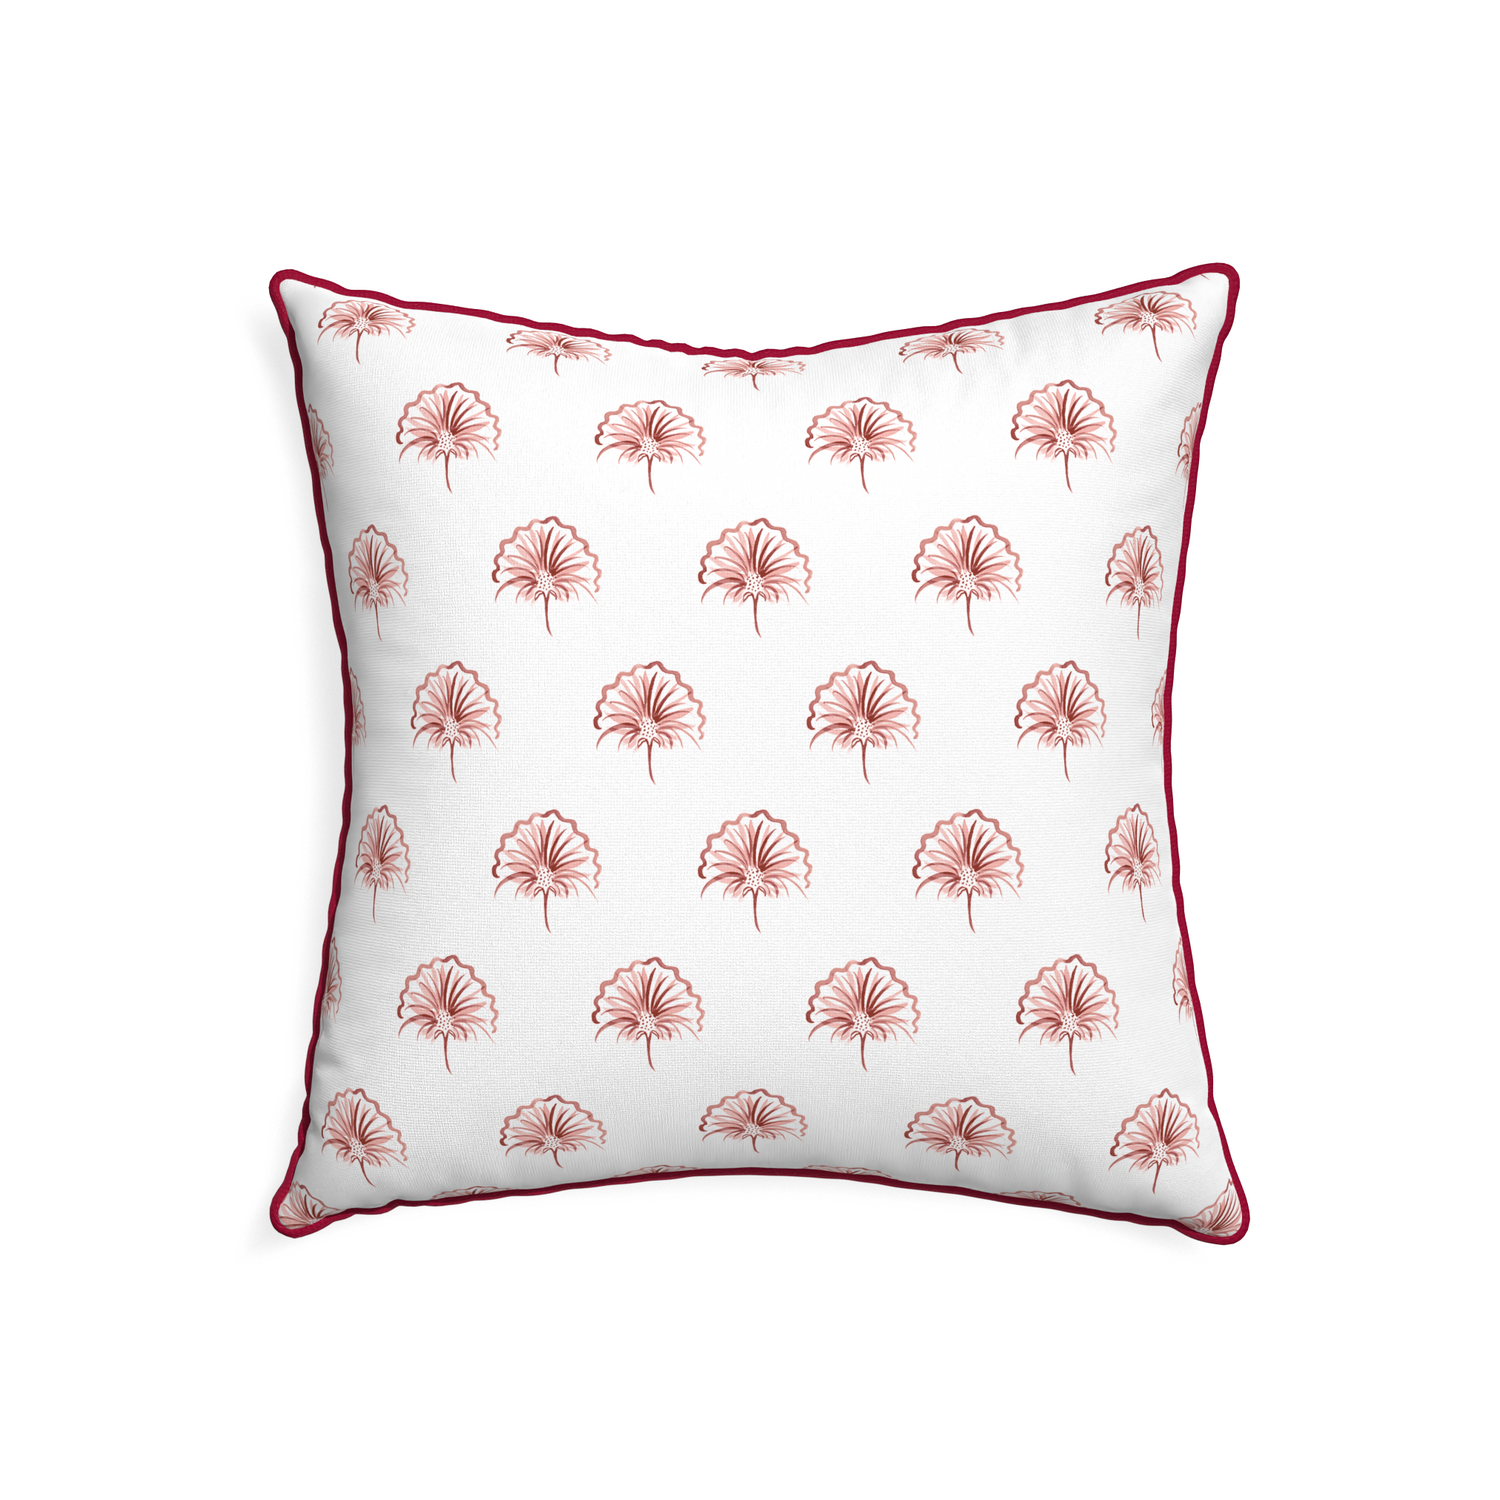 22-square penelope rose custom floral pinkpillow with raspberry piping on white background